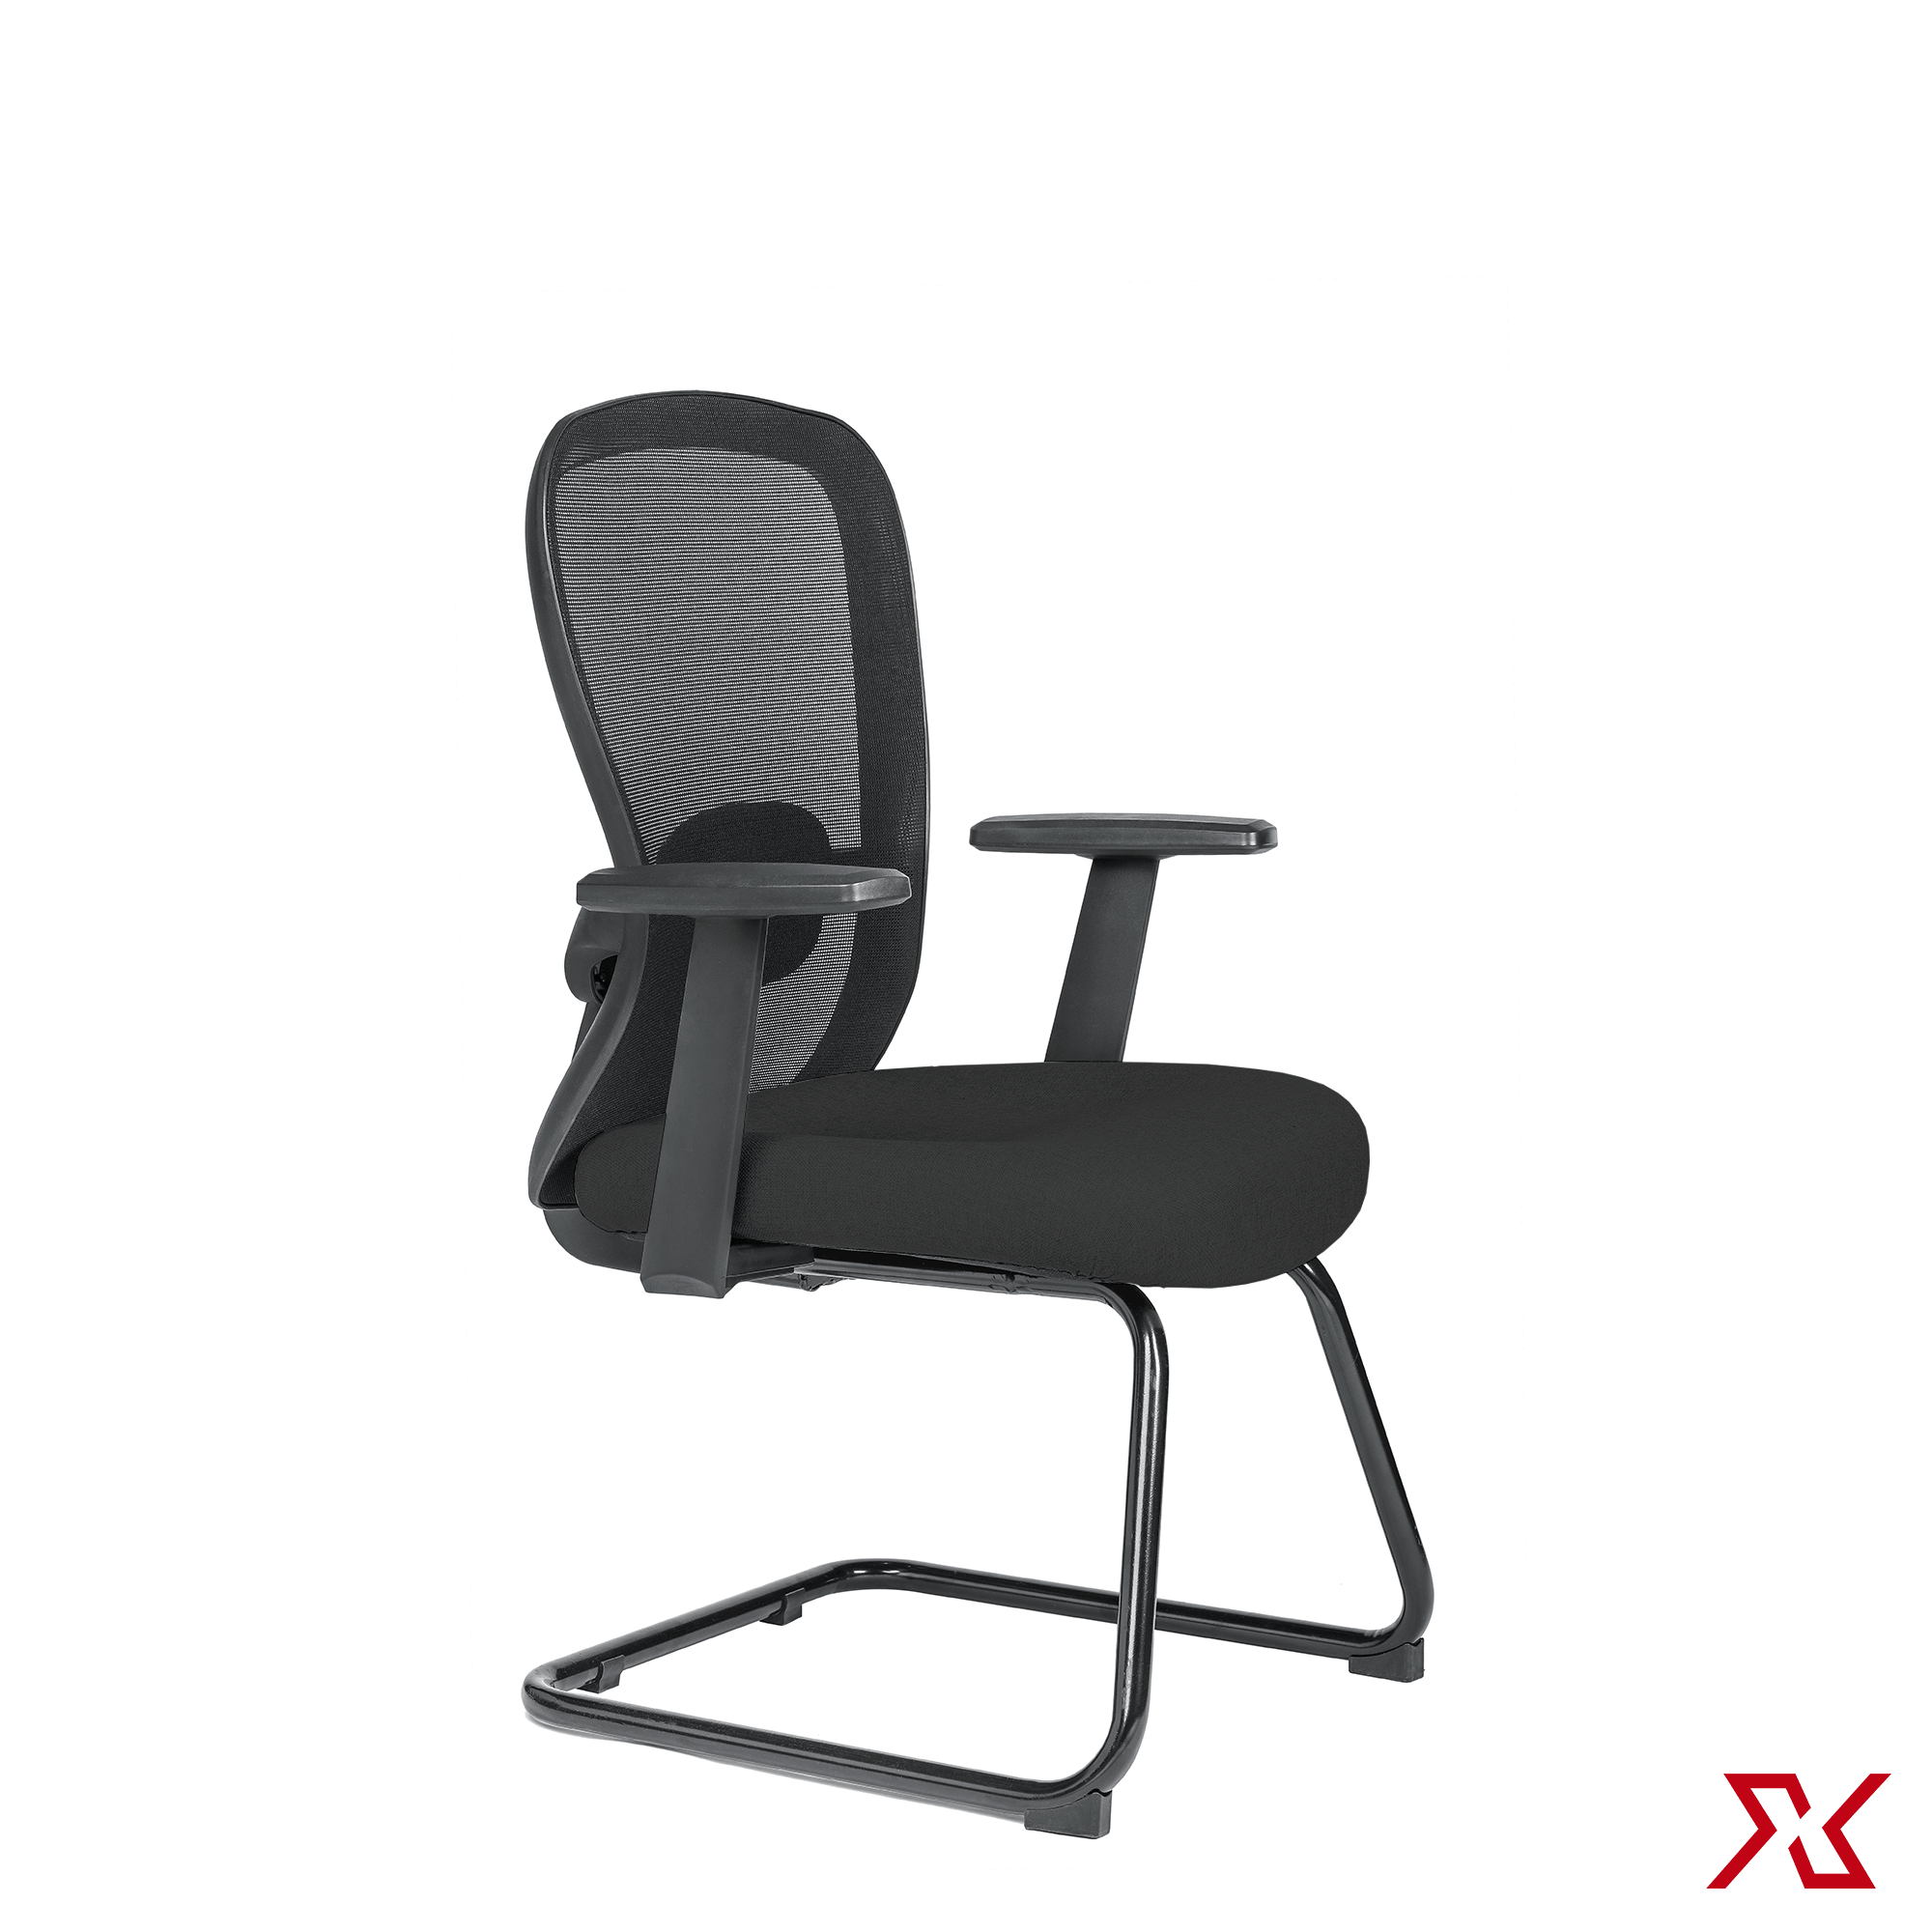 DUNE Medium Back Visitor (Black Chair) - Exclusiff Seating Sytems